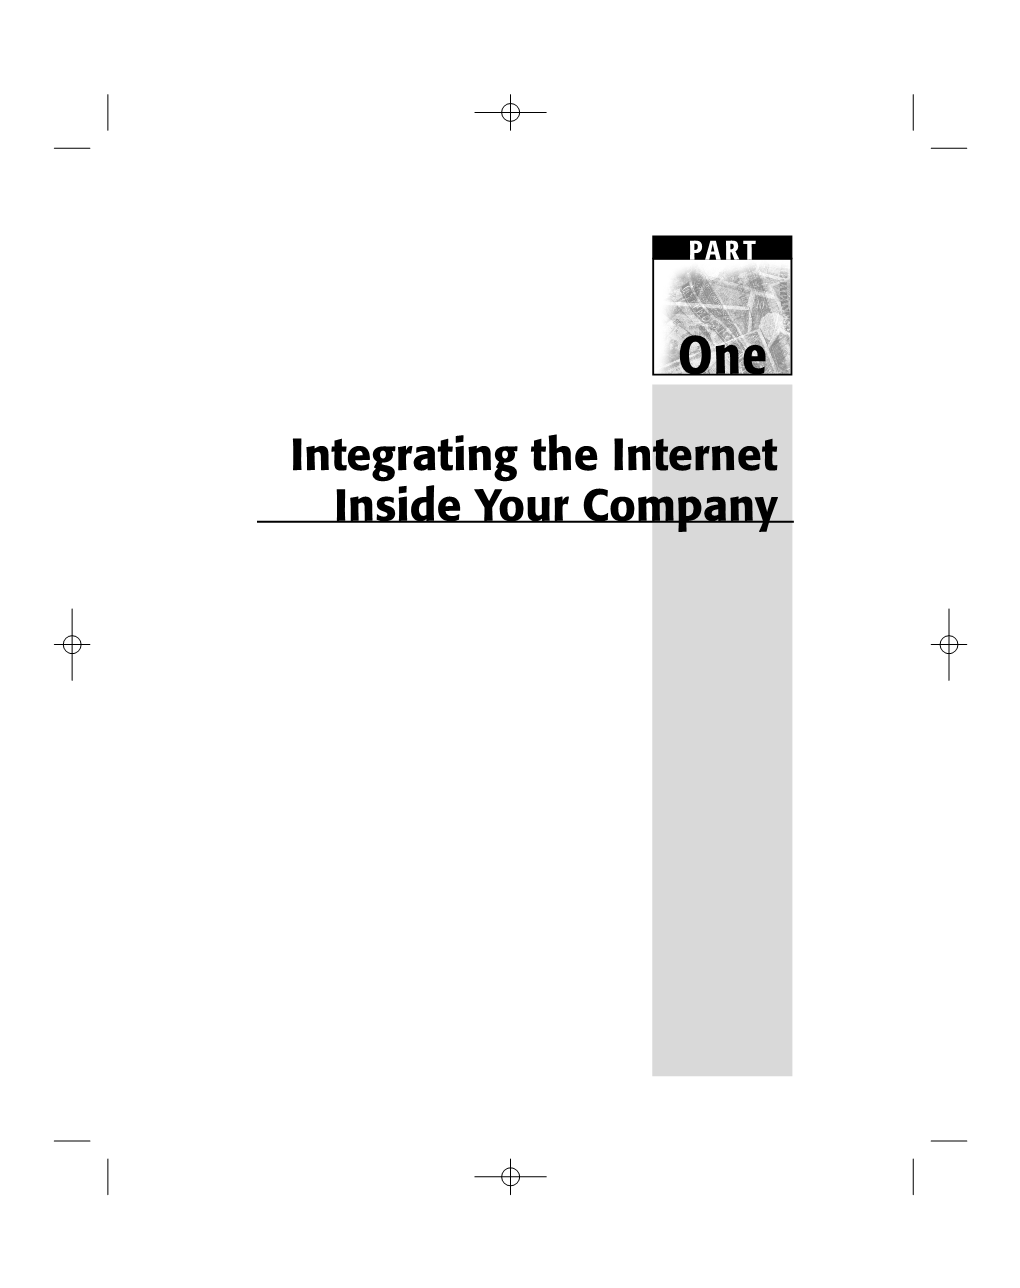 Integrating the Internet Inside Your Company